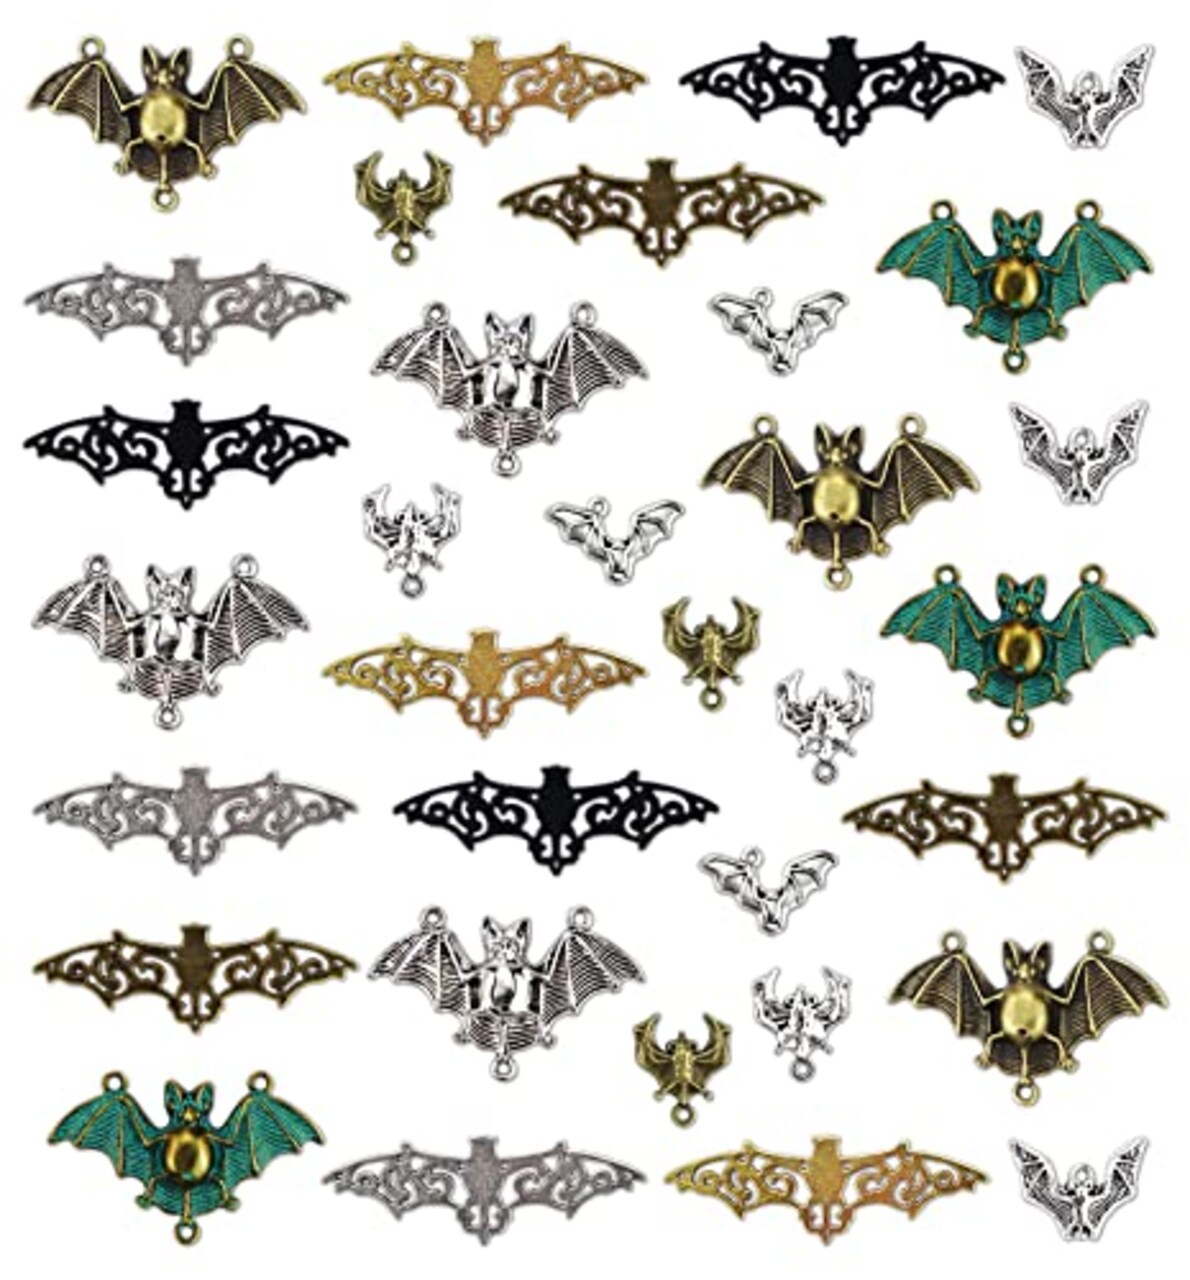 JIALEEY 33PCS Bat Charms Mixed Halloween Spooky Flittermouse Flying Vampire  Bat Connector Charms Pendants DIY for Jewelry Making Crafting